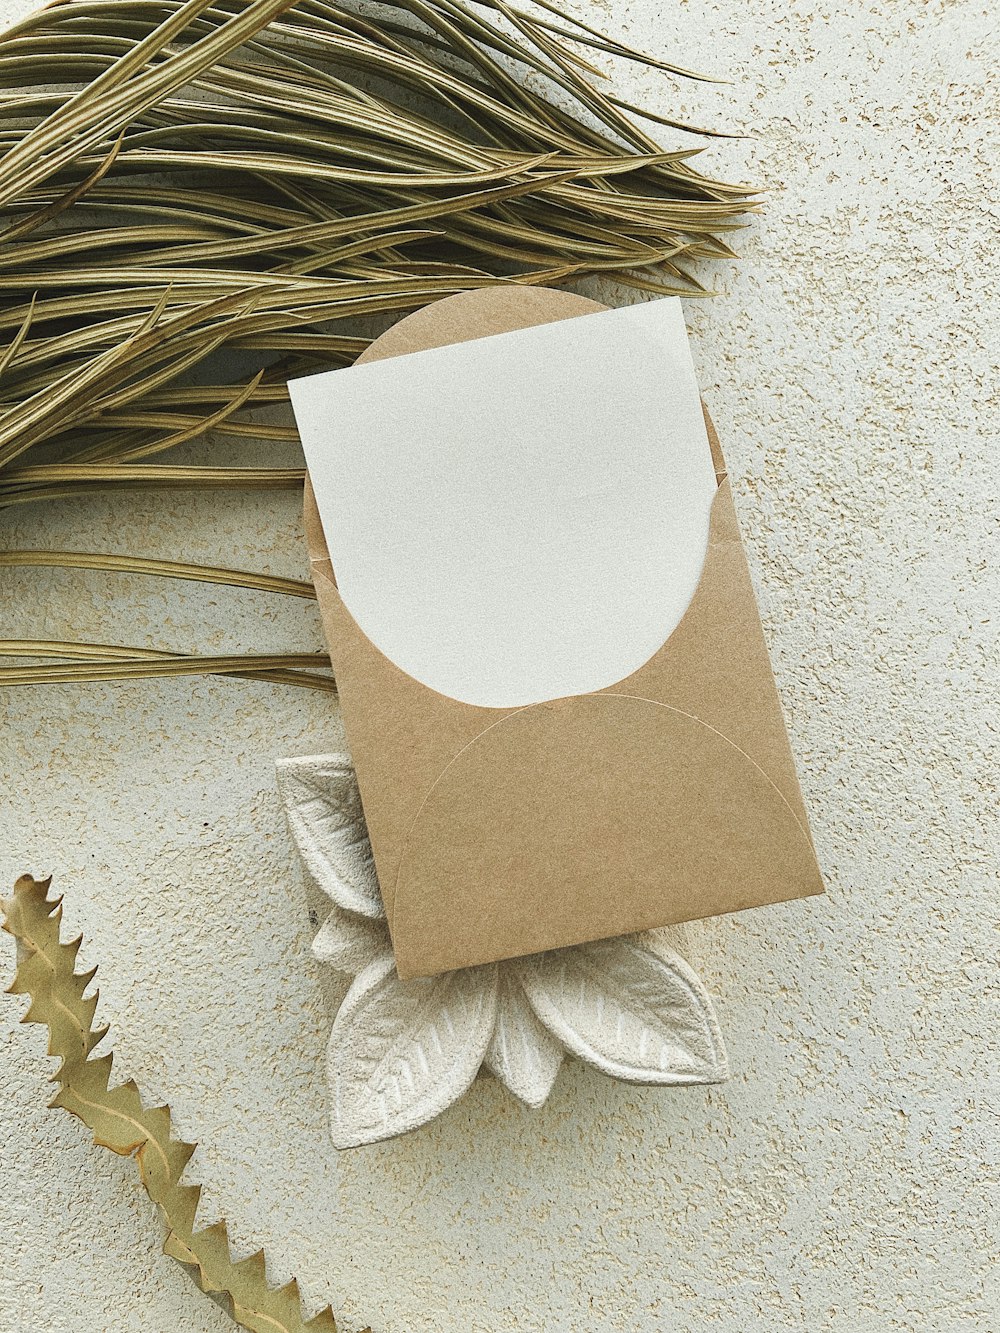 a white paper towel on a white surface